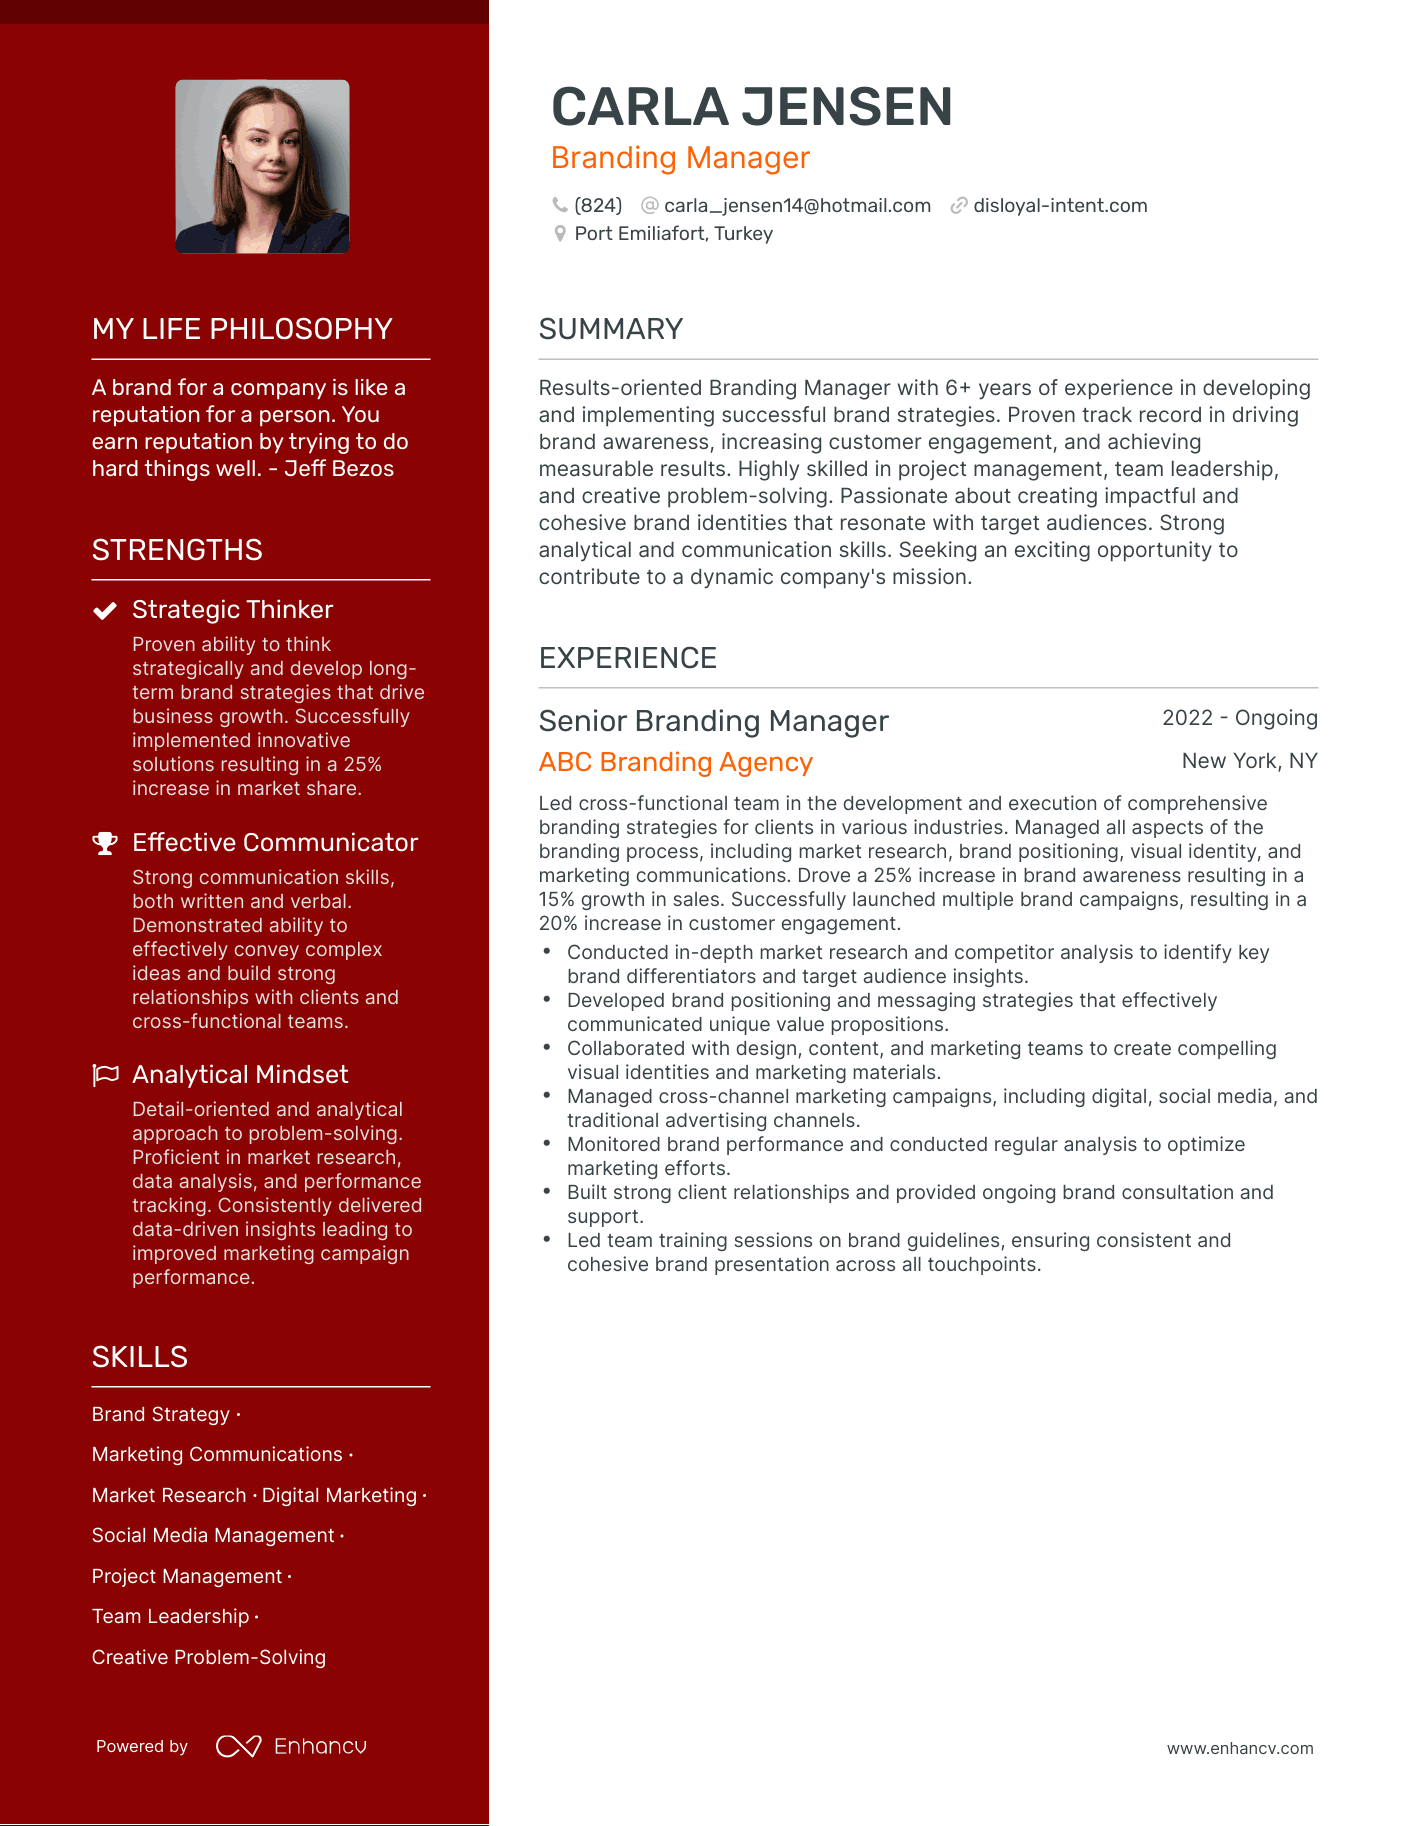 Branding Manager resume example